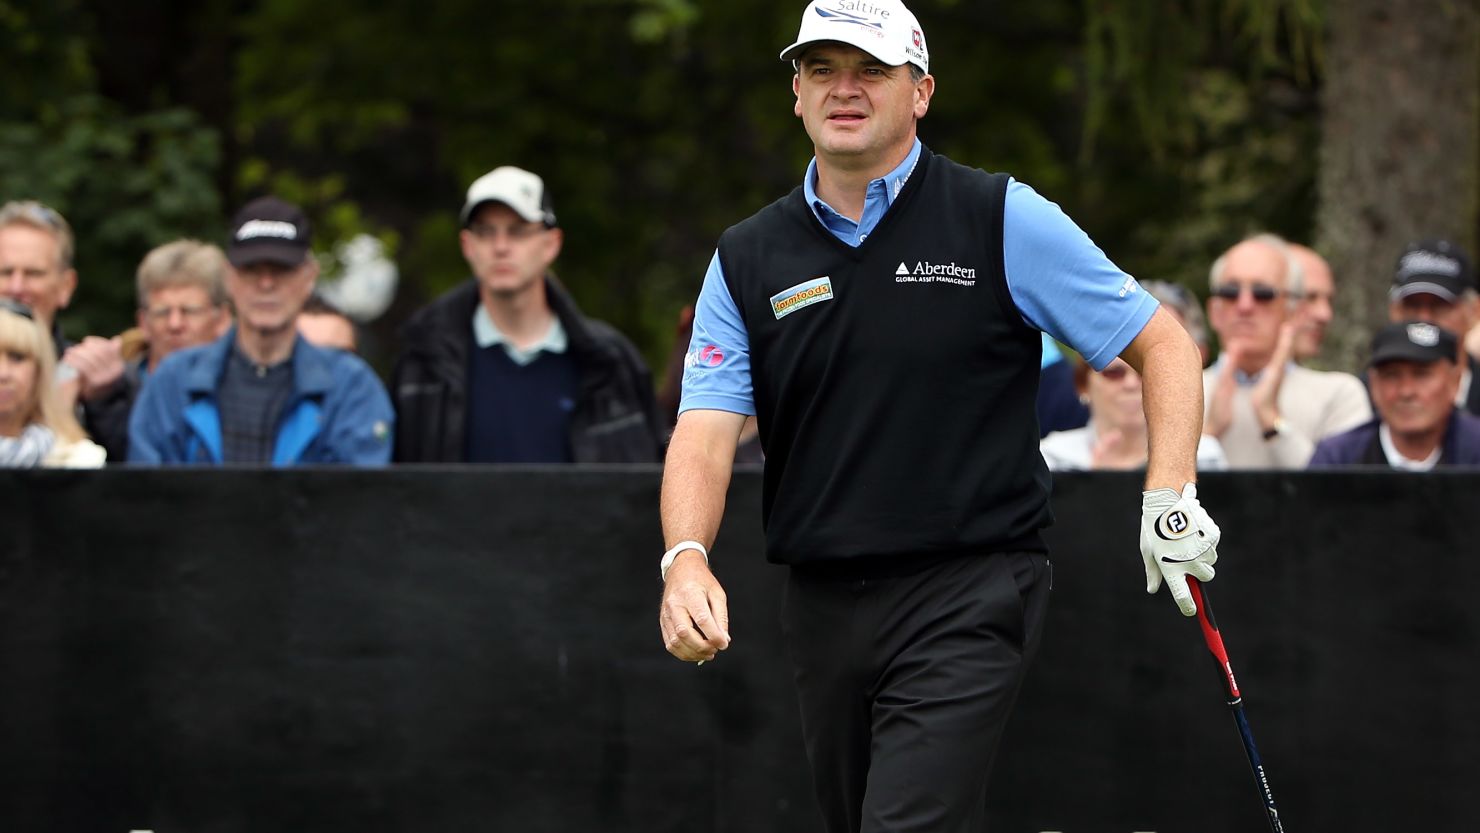 Paul Lawrie strode to a commanding four shot victory in the Johnnie Walker Championship at Gleneagles.